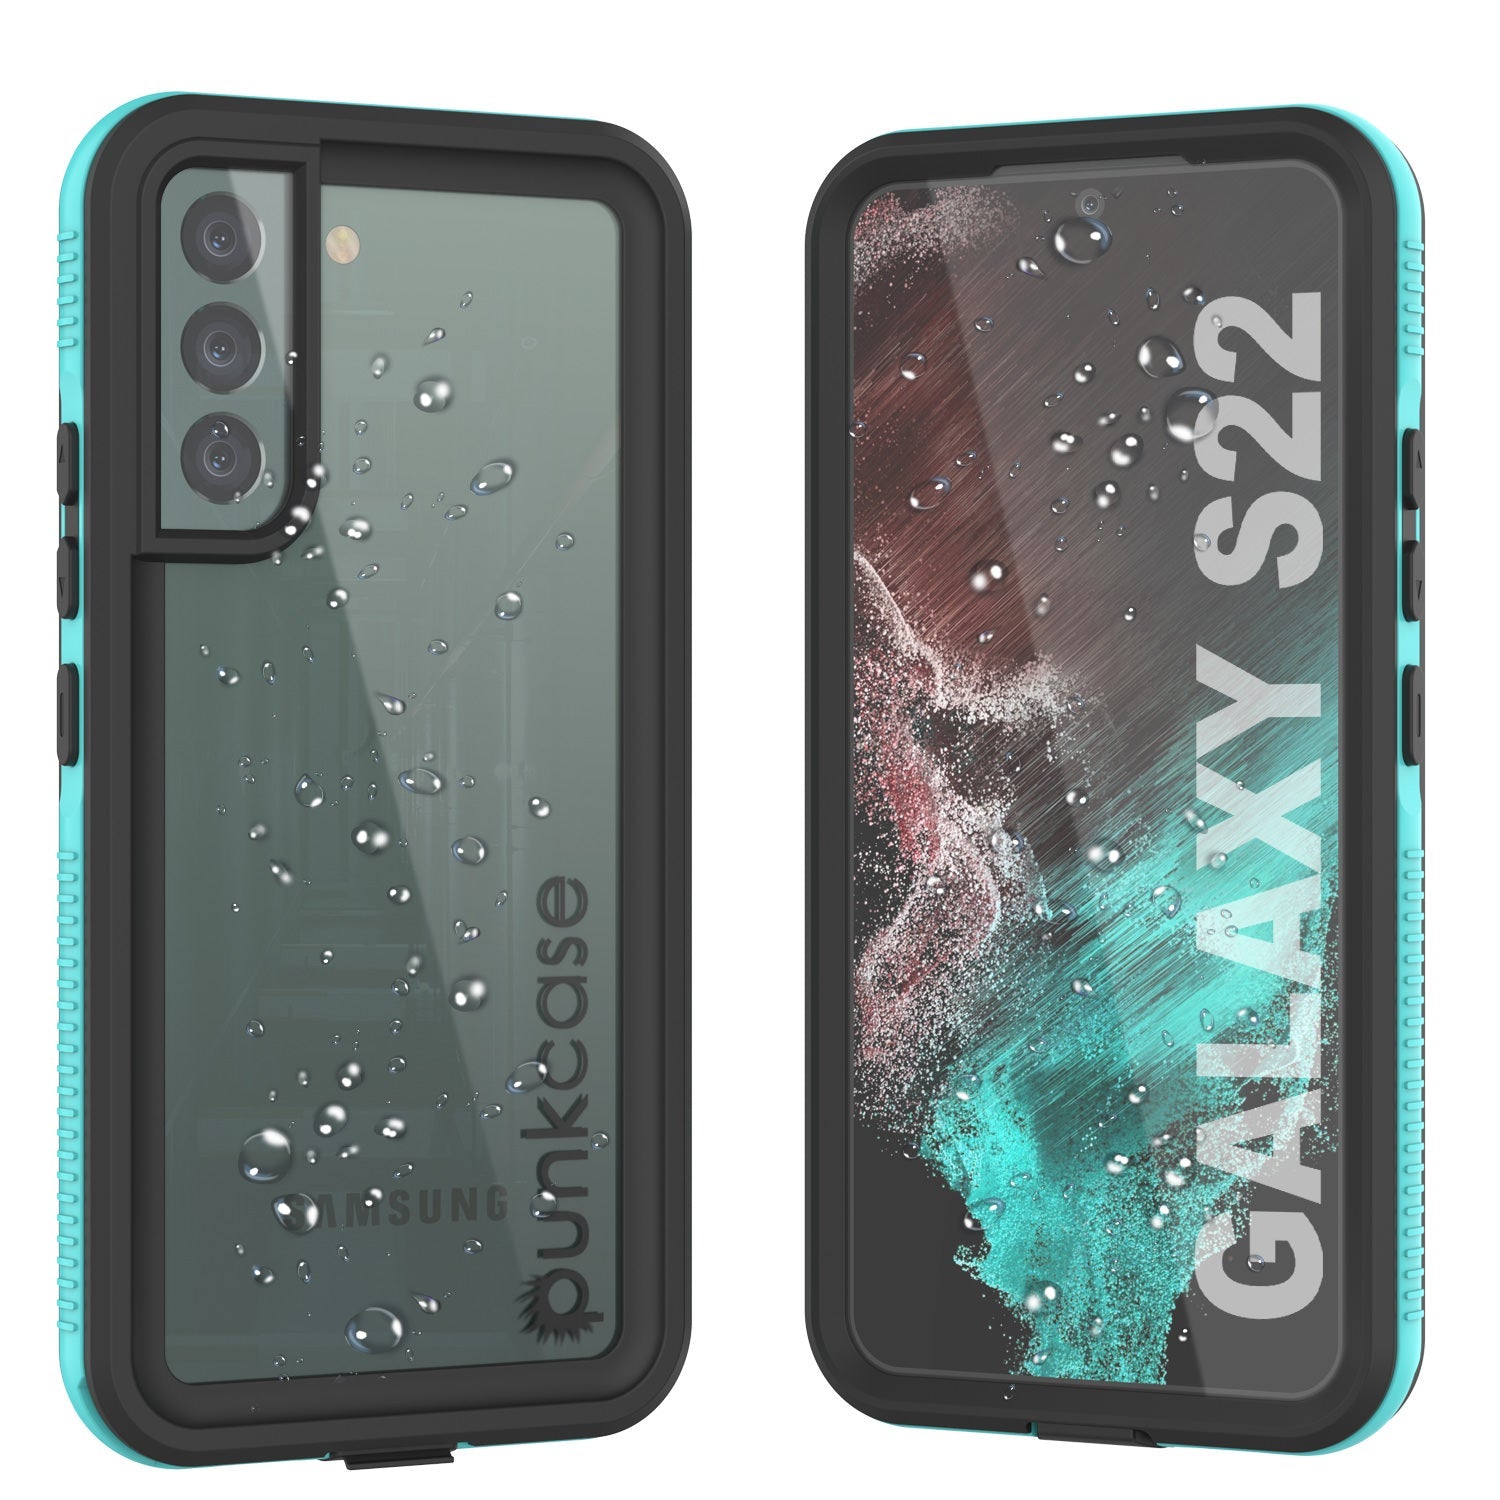 Galaxy S22 Waterproof Case PunkCase Ultimato Teal Thin 6.6ft Underwater IP68 Shock/Snow Proof [Teal]